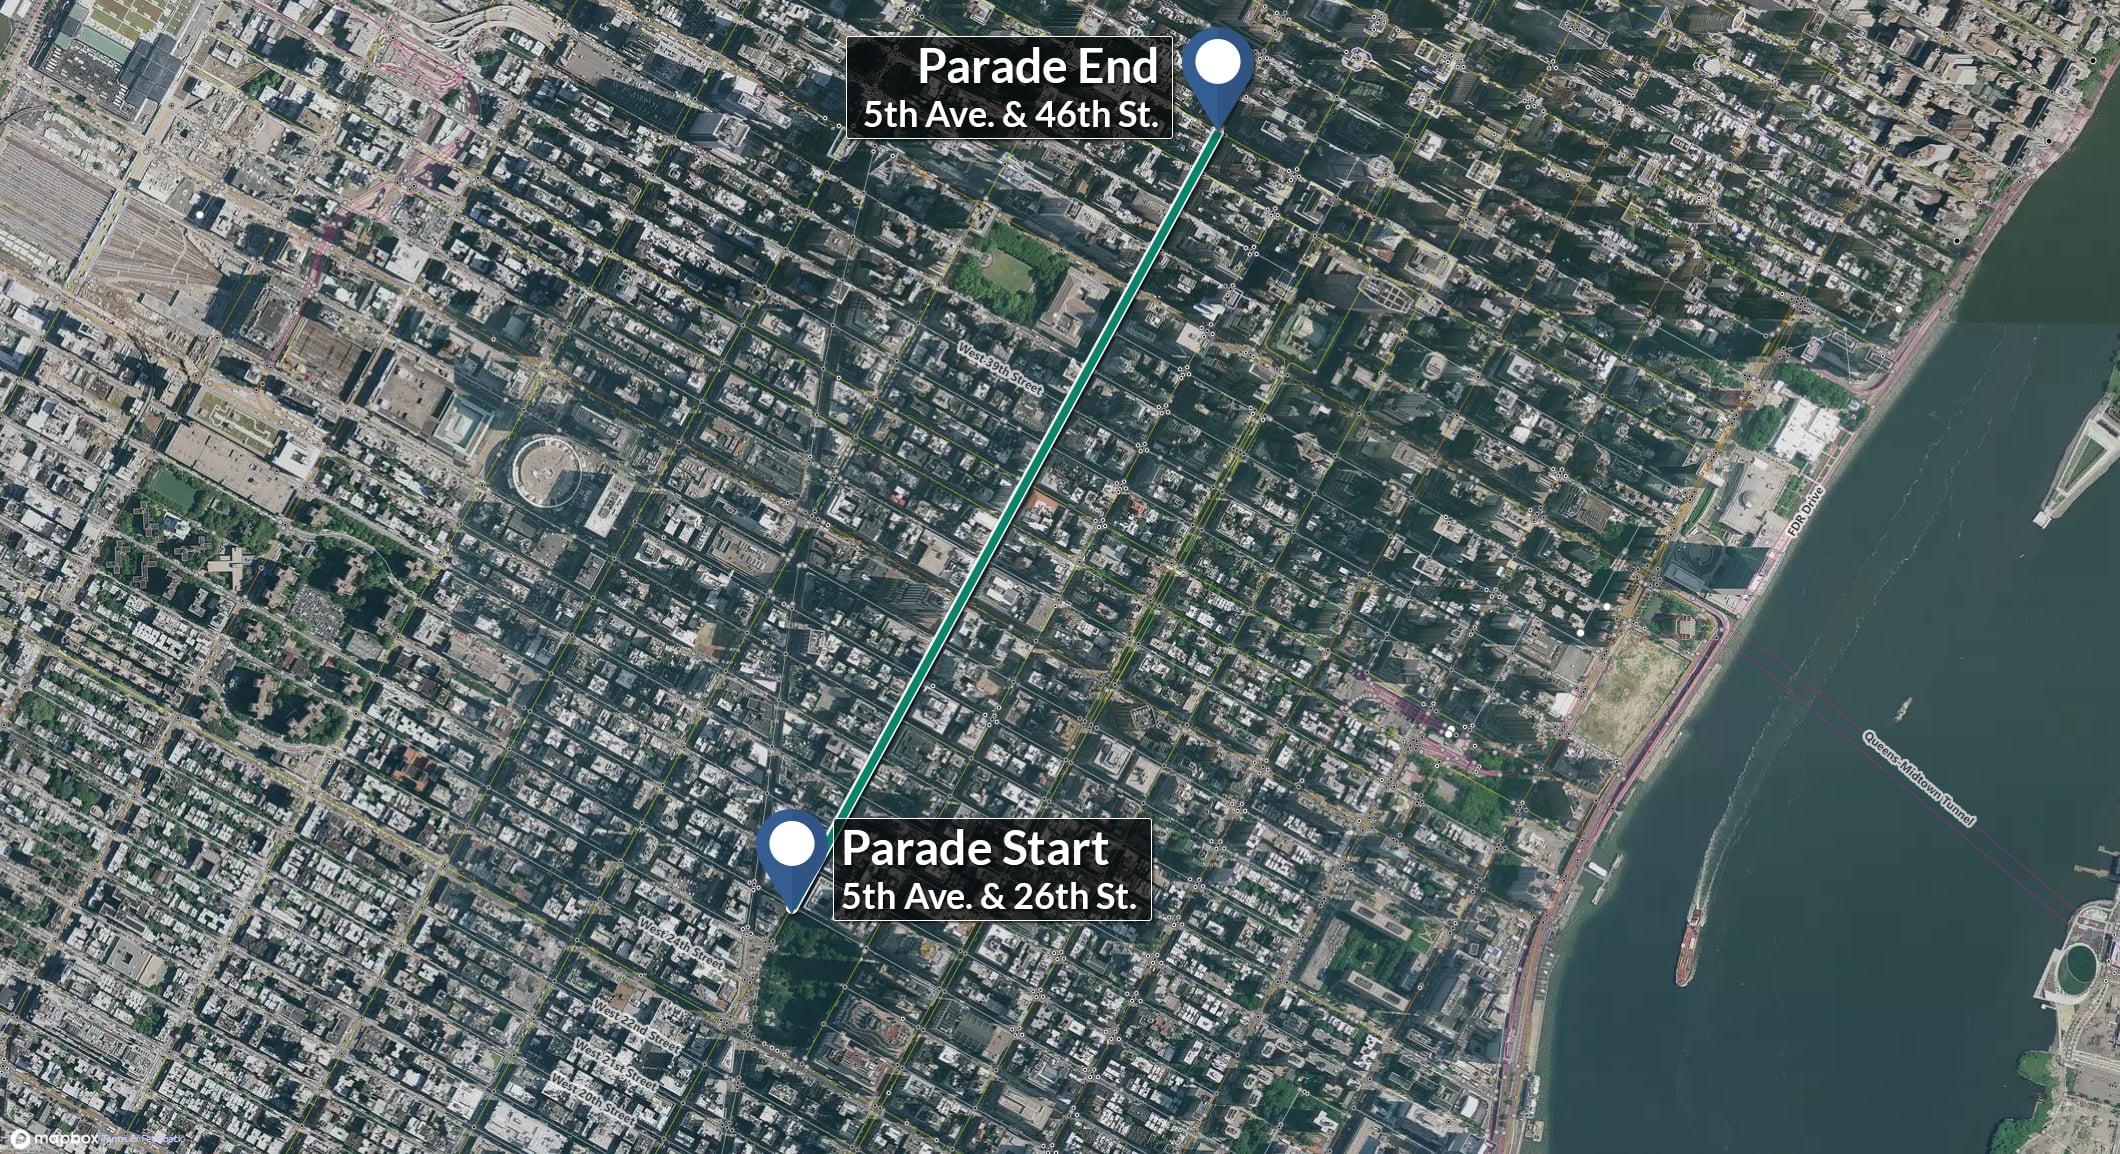 The Parade will start at 5th & 26th and proceed north to 5th and 46.